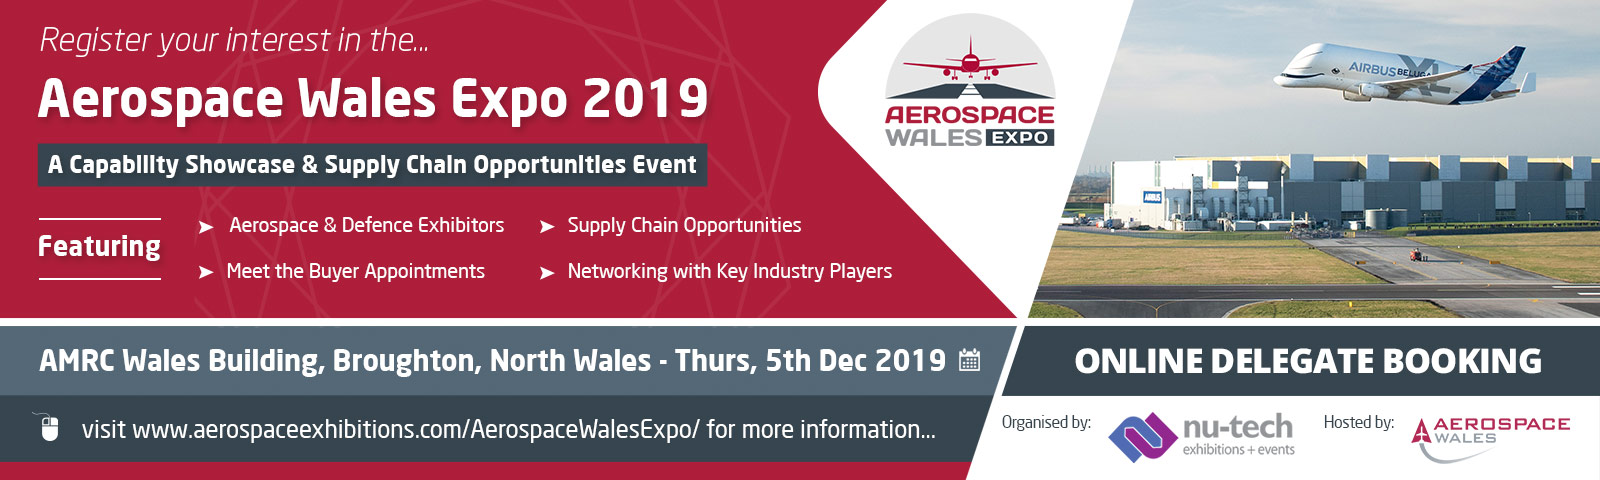 MSM to exhibit at Aerospace Wales Expo